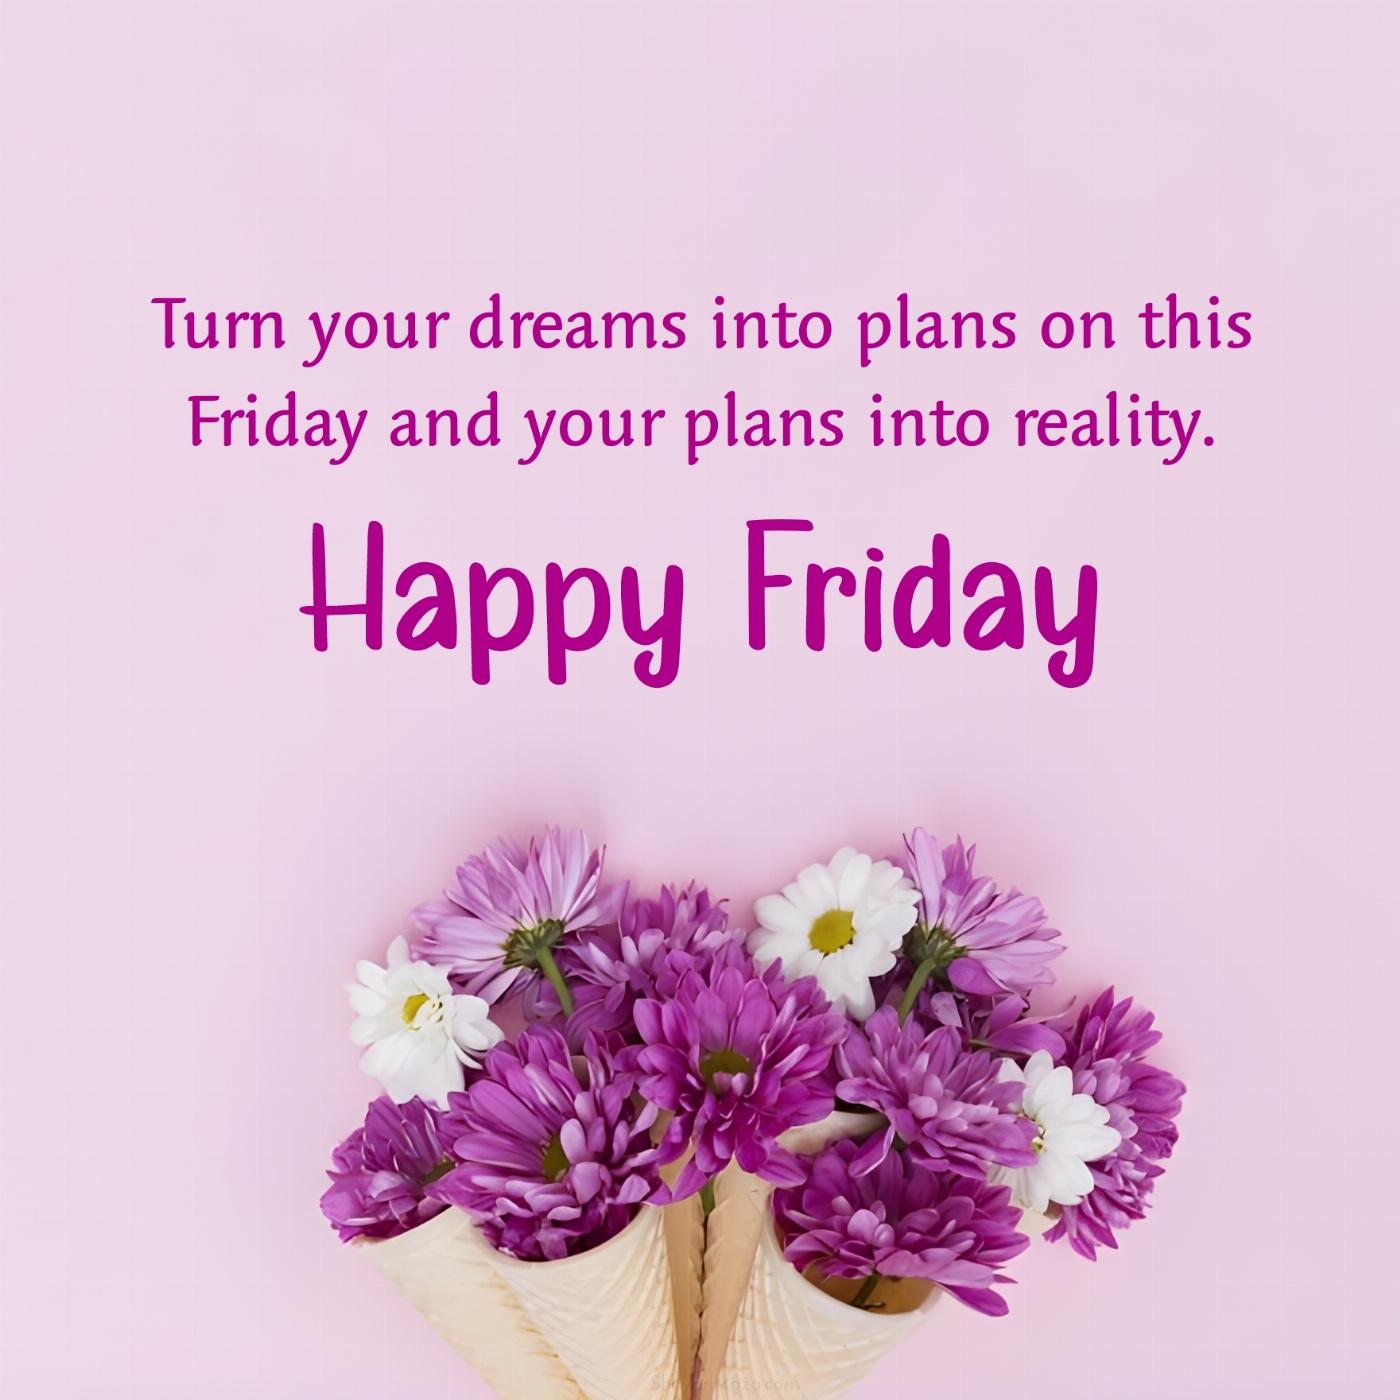 Turn your dreams into plans on this Friday and your plans into reality